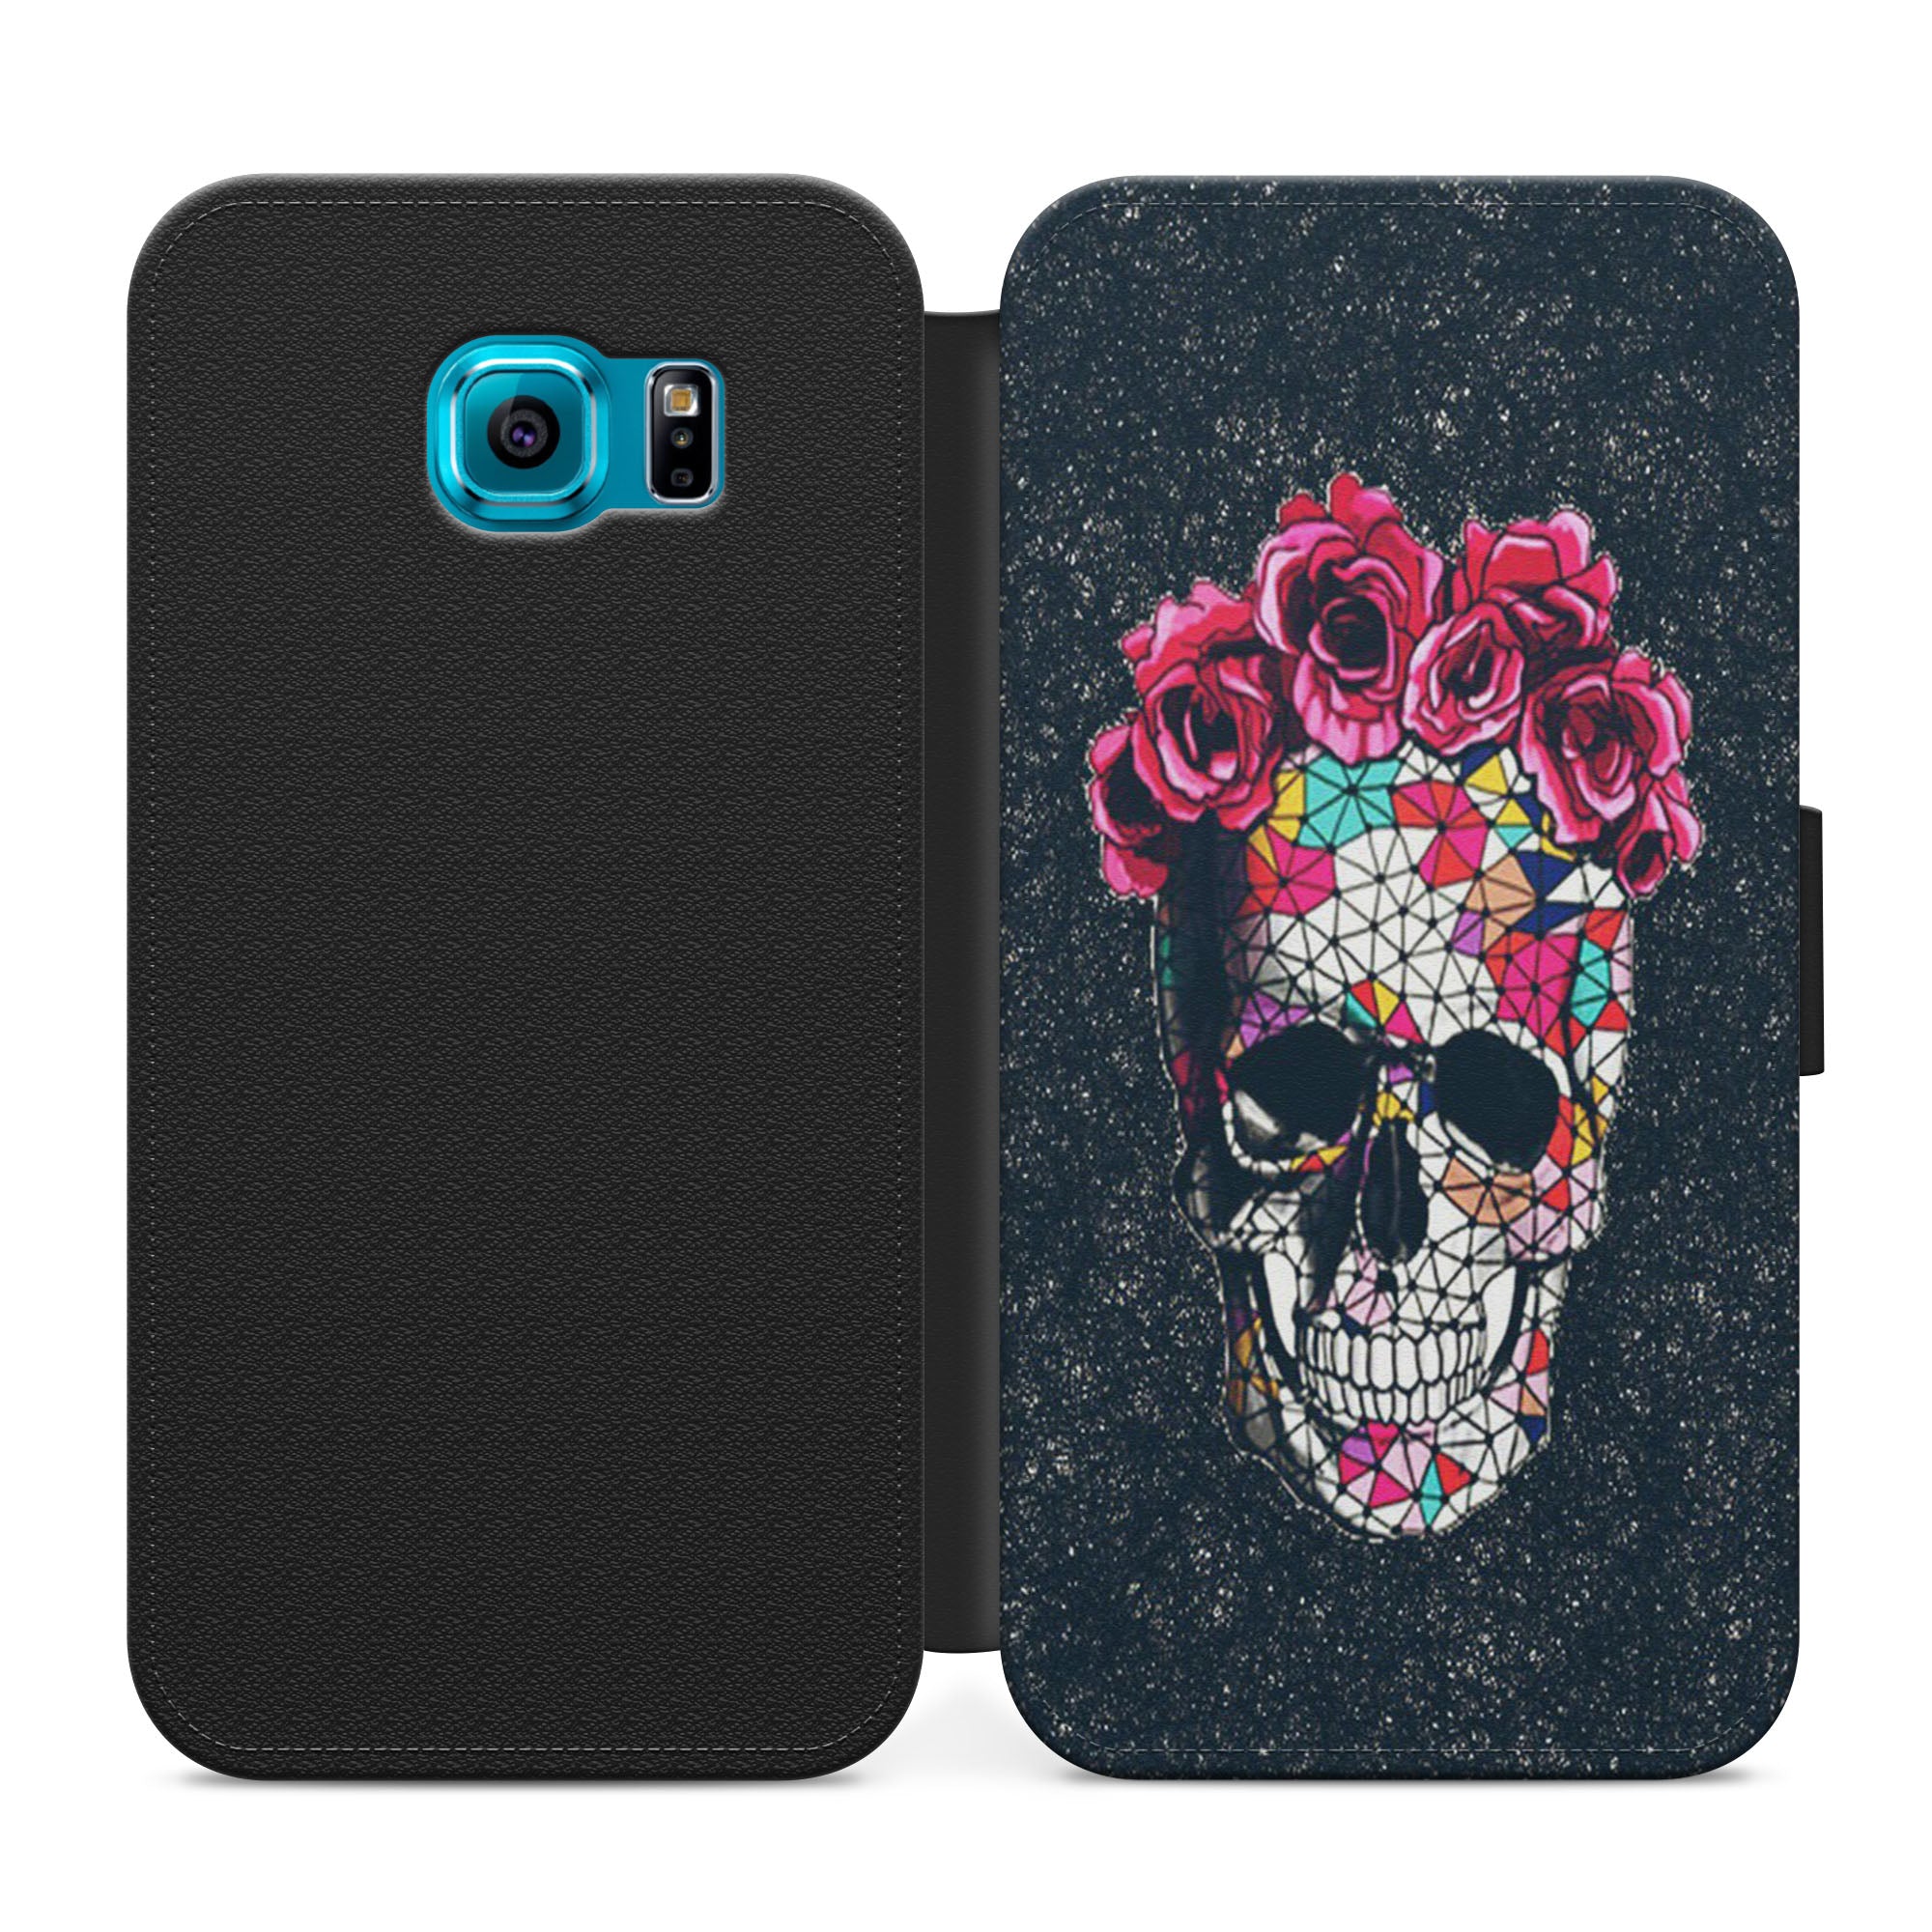 Floral Skull Faux Leather Flip Case Wallet for iPhone / Samsung